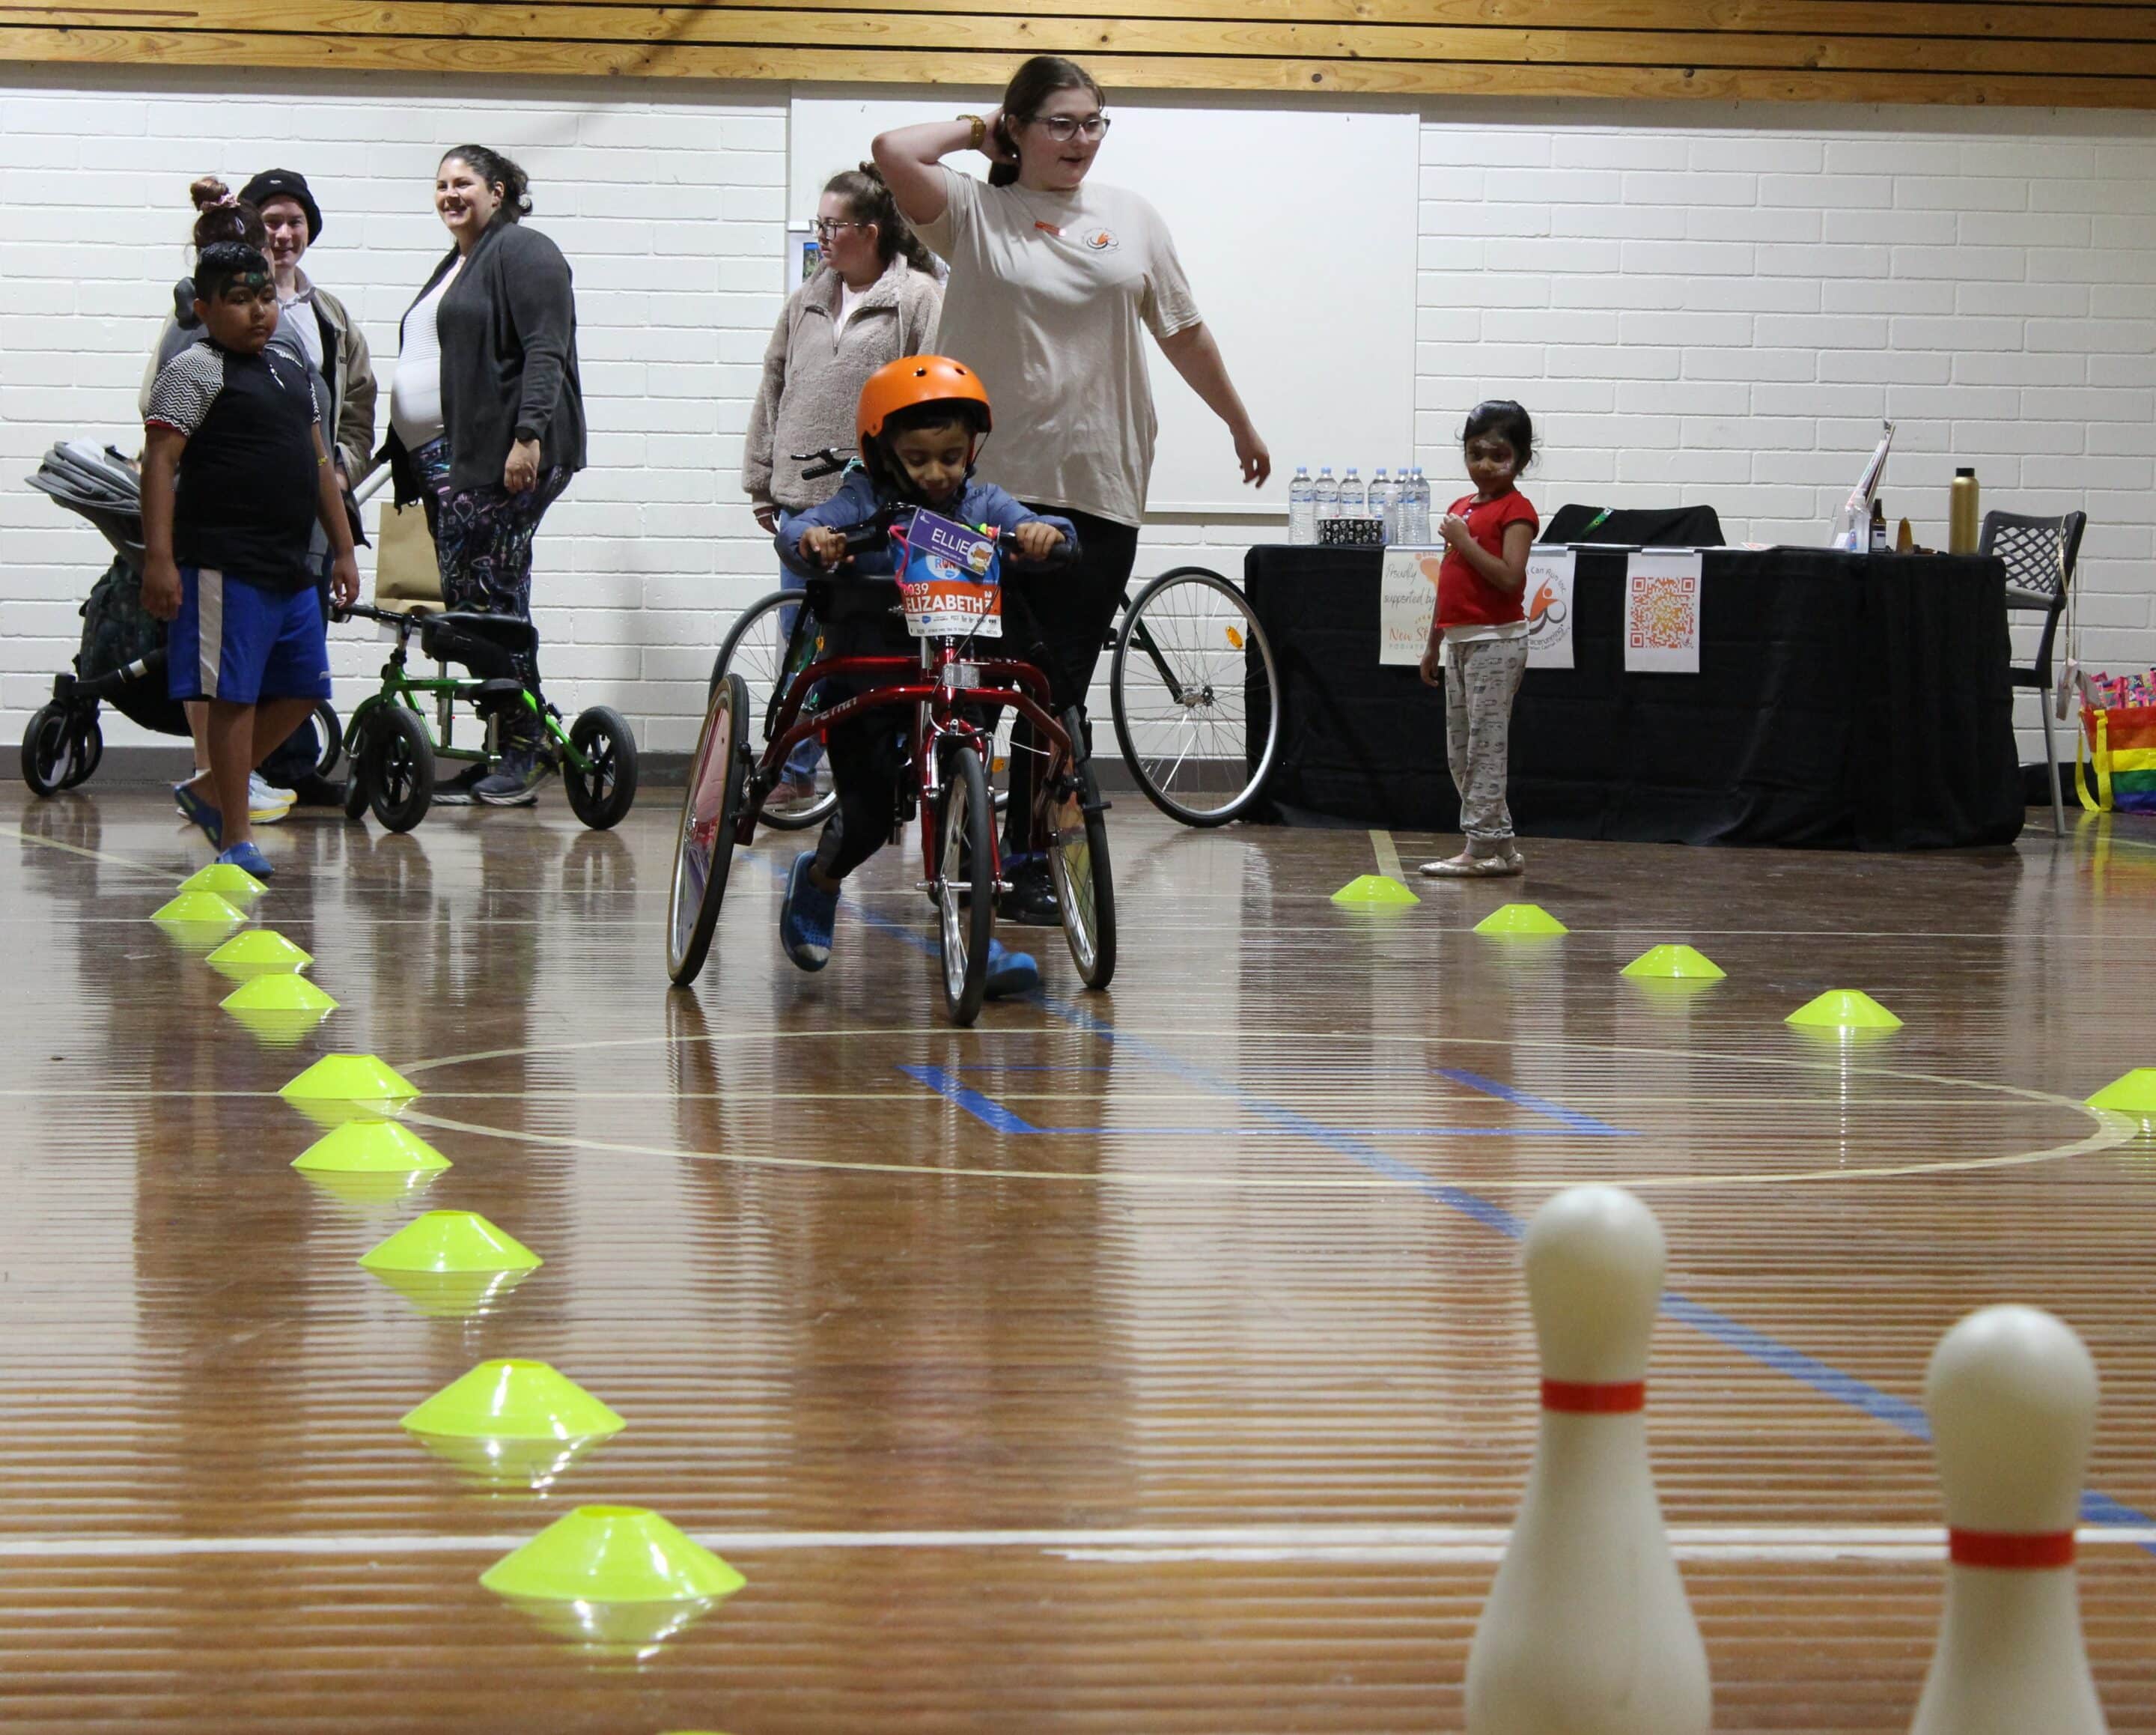 Kids on disability bikes playing ten-pin-bowling indoors at the Accessible Sports and Recreation Expo